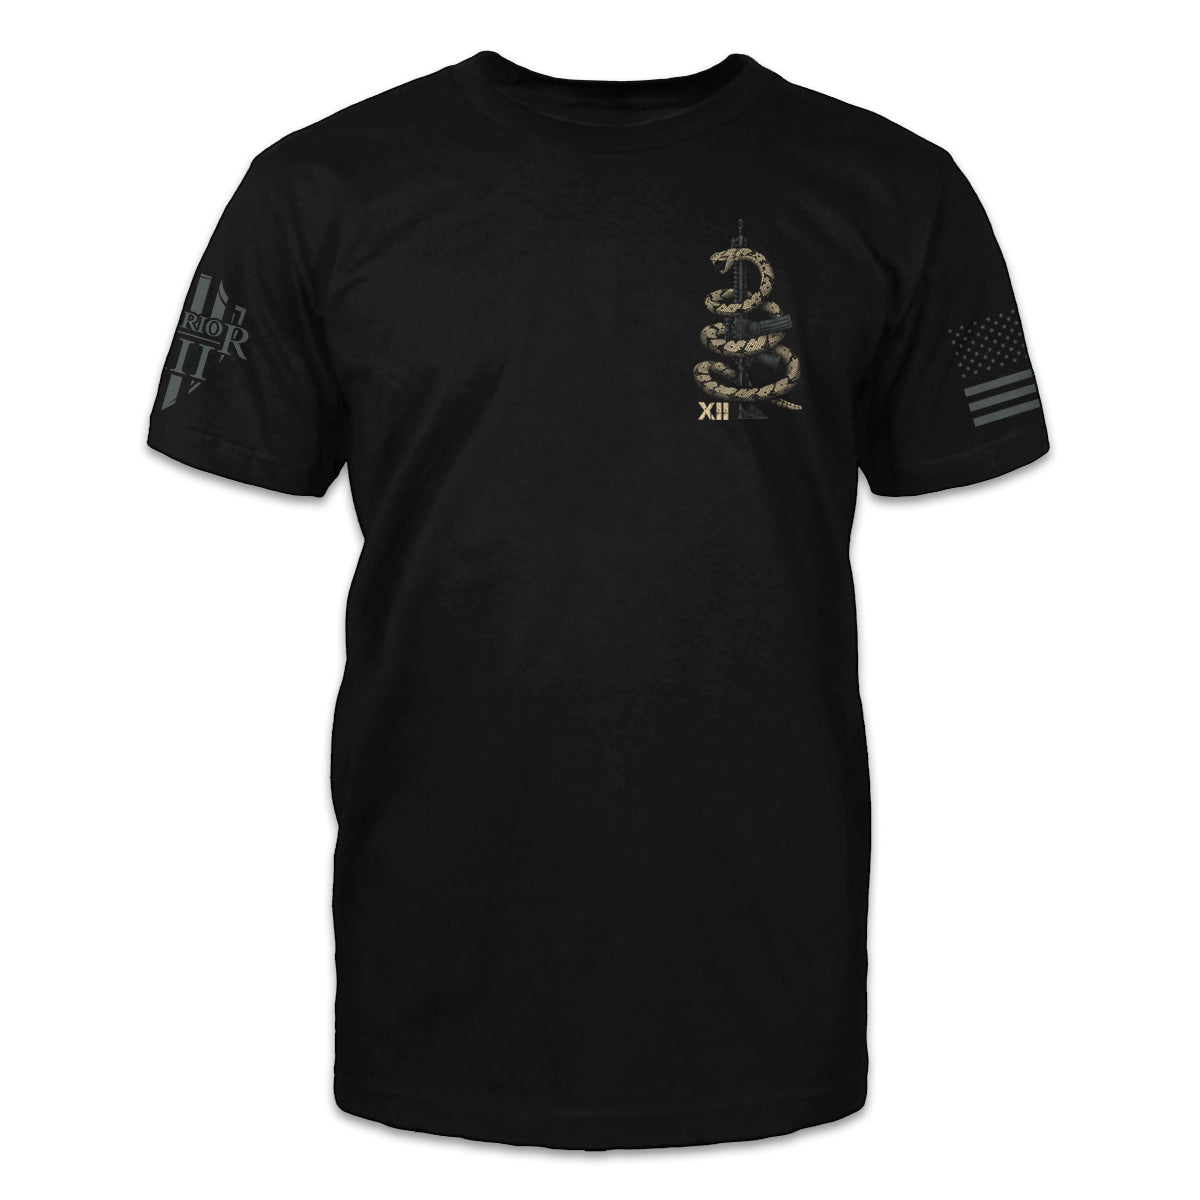 The front of a black t-shirt shirt featuring a small pocket image in a rattlesnake coiled around a rifle.